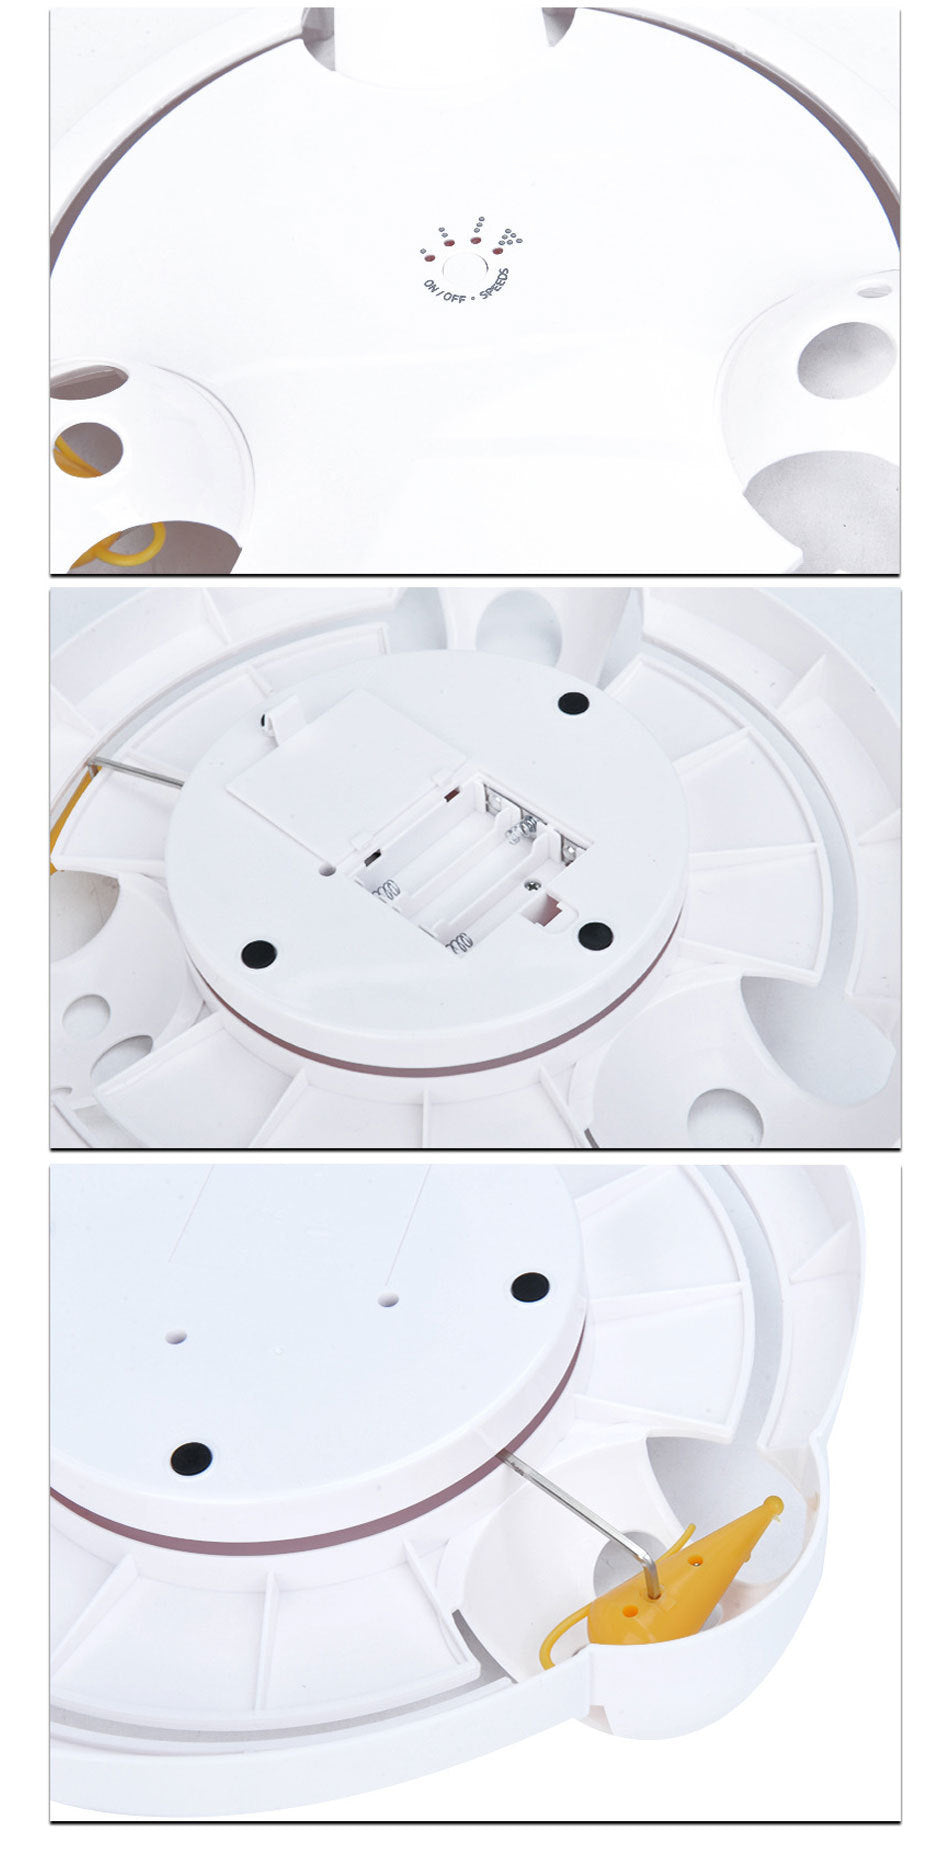 Electric Cat Toy  Wheel Crazy White Cat Catching Mouse Automatic Turntable Cats Toys  620g